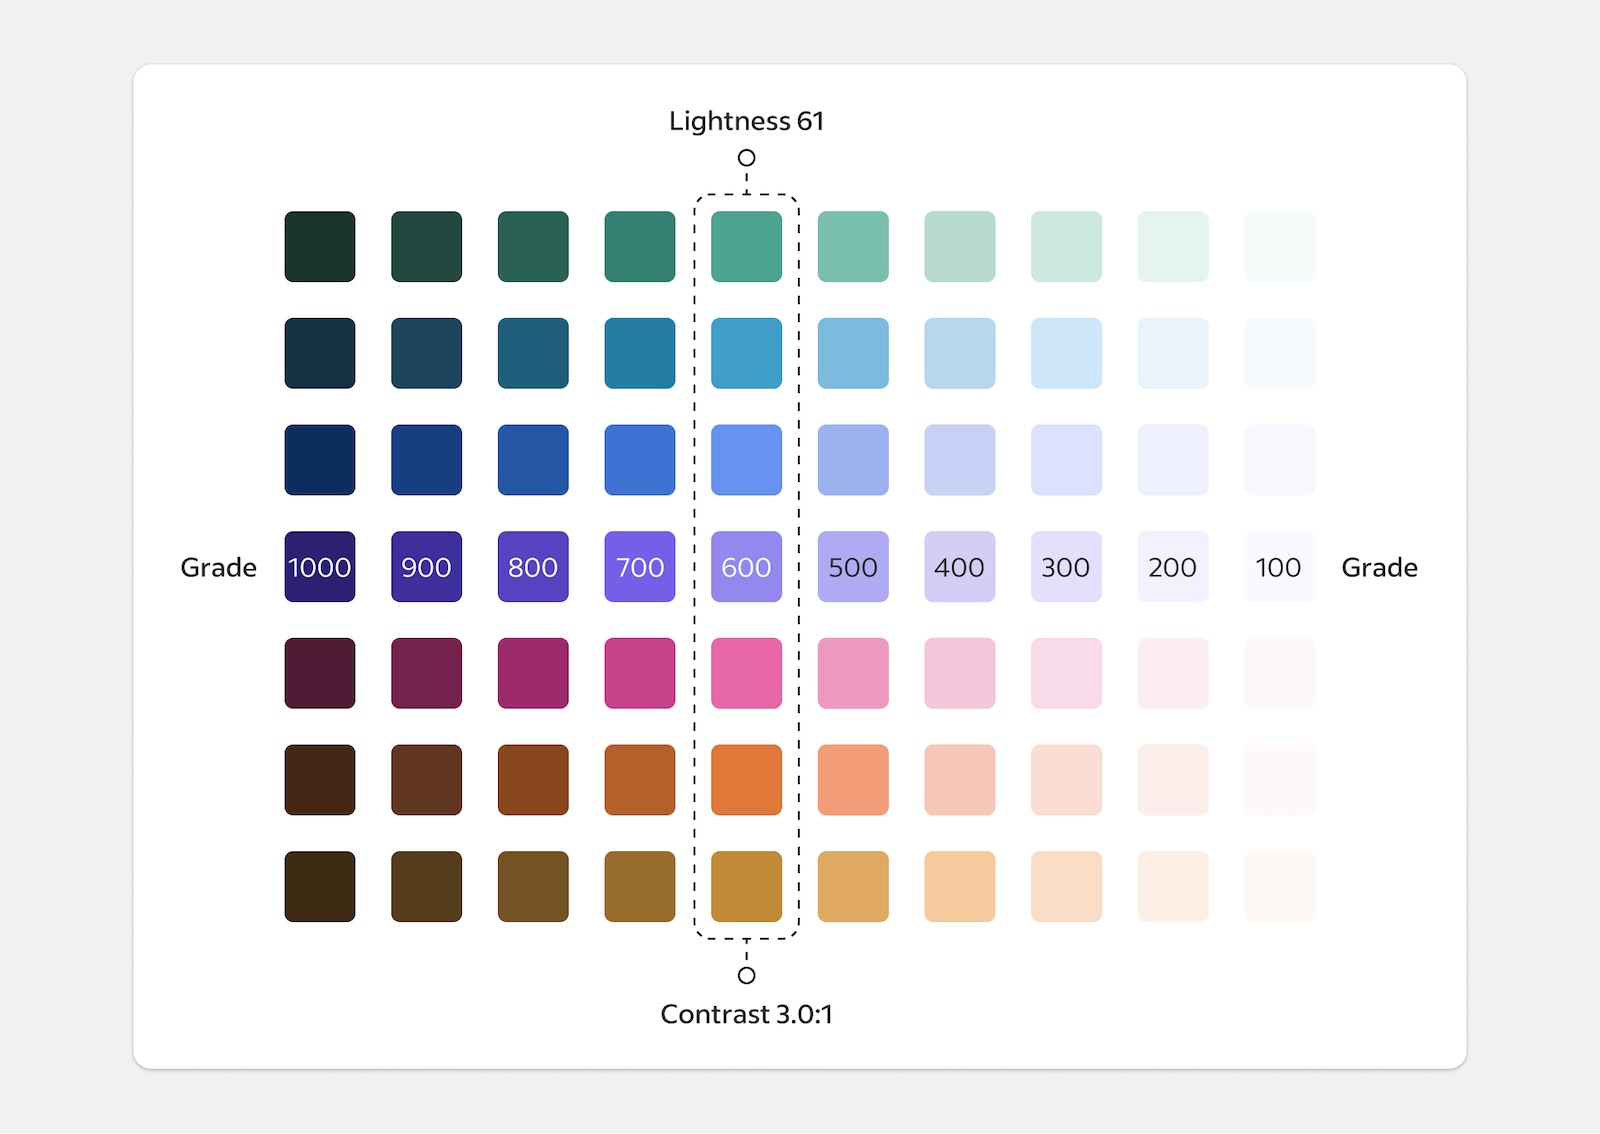 Chart of Indeed’s seven expressive colors, each in 10 different grades of lightness from the lightest, at 100, to the darkest, at 1,000. A selection of colors in grade 600 is labeled with the text Lightness 61, showing that all colors within that selection have the same contrast of 3.0:1.